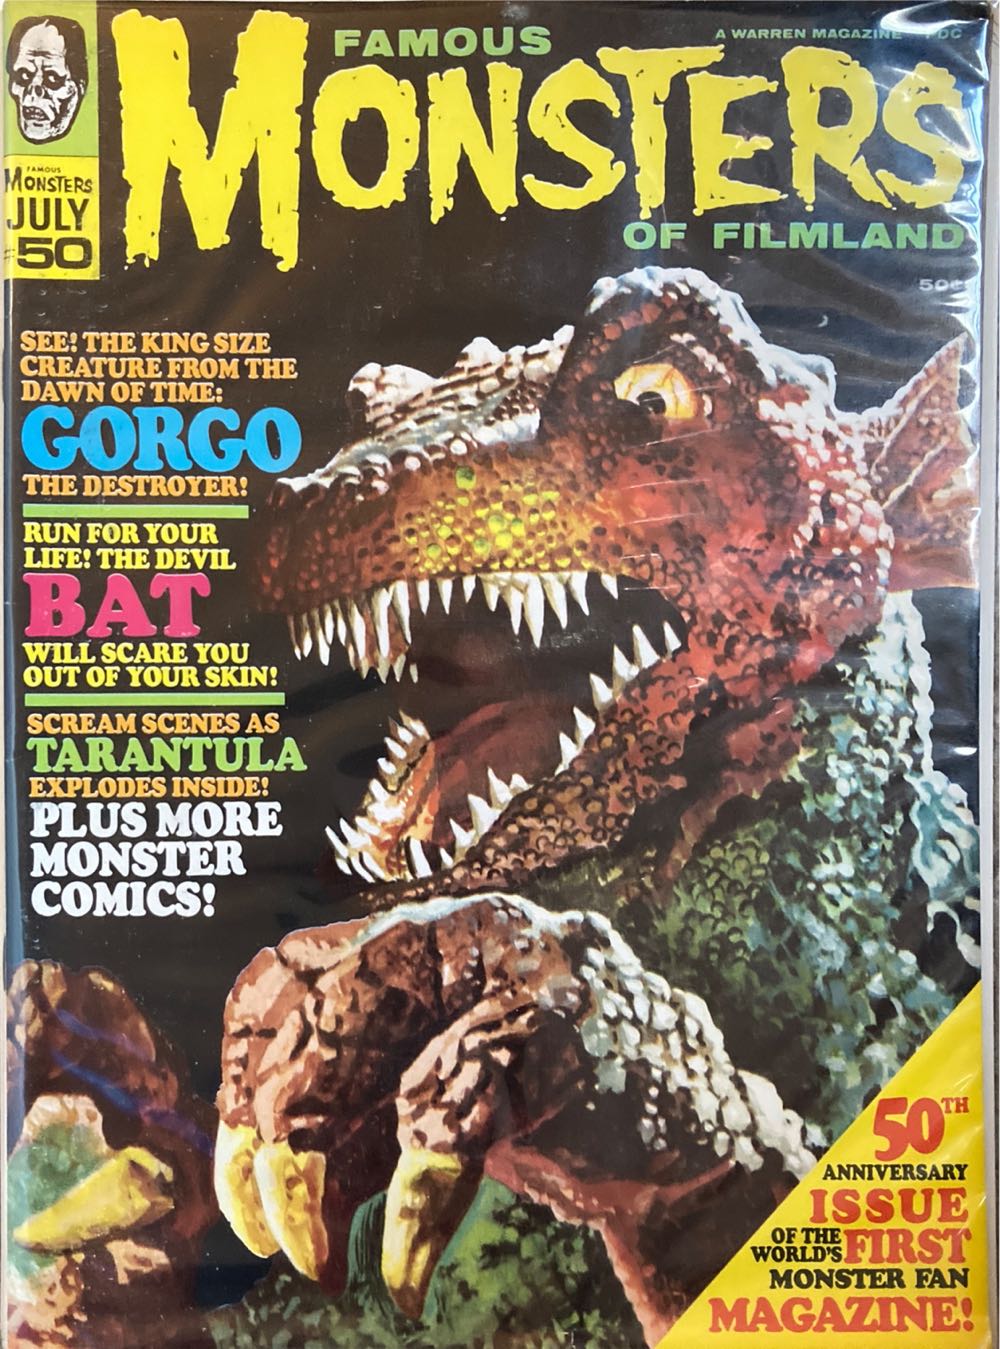 Famous Monsters Of Filmland #50  (July) magazine collectible - Main Image 1